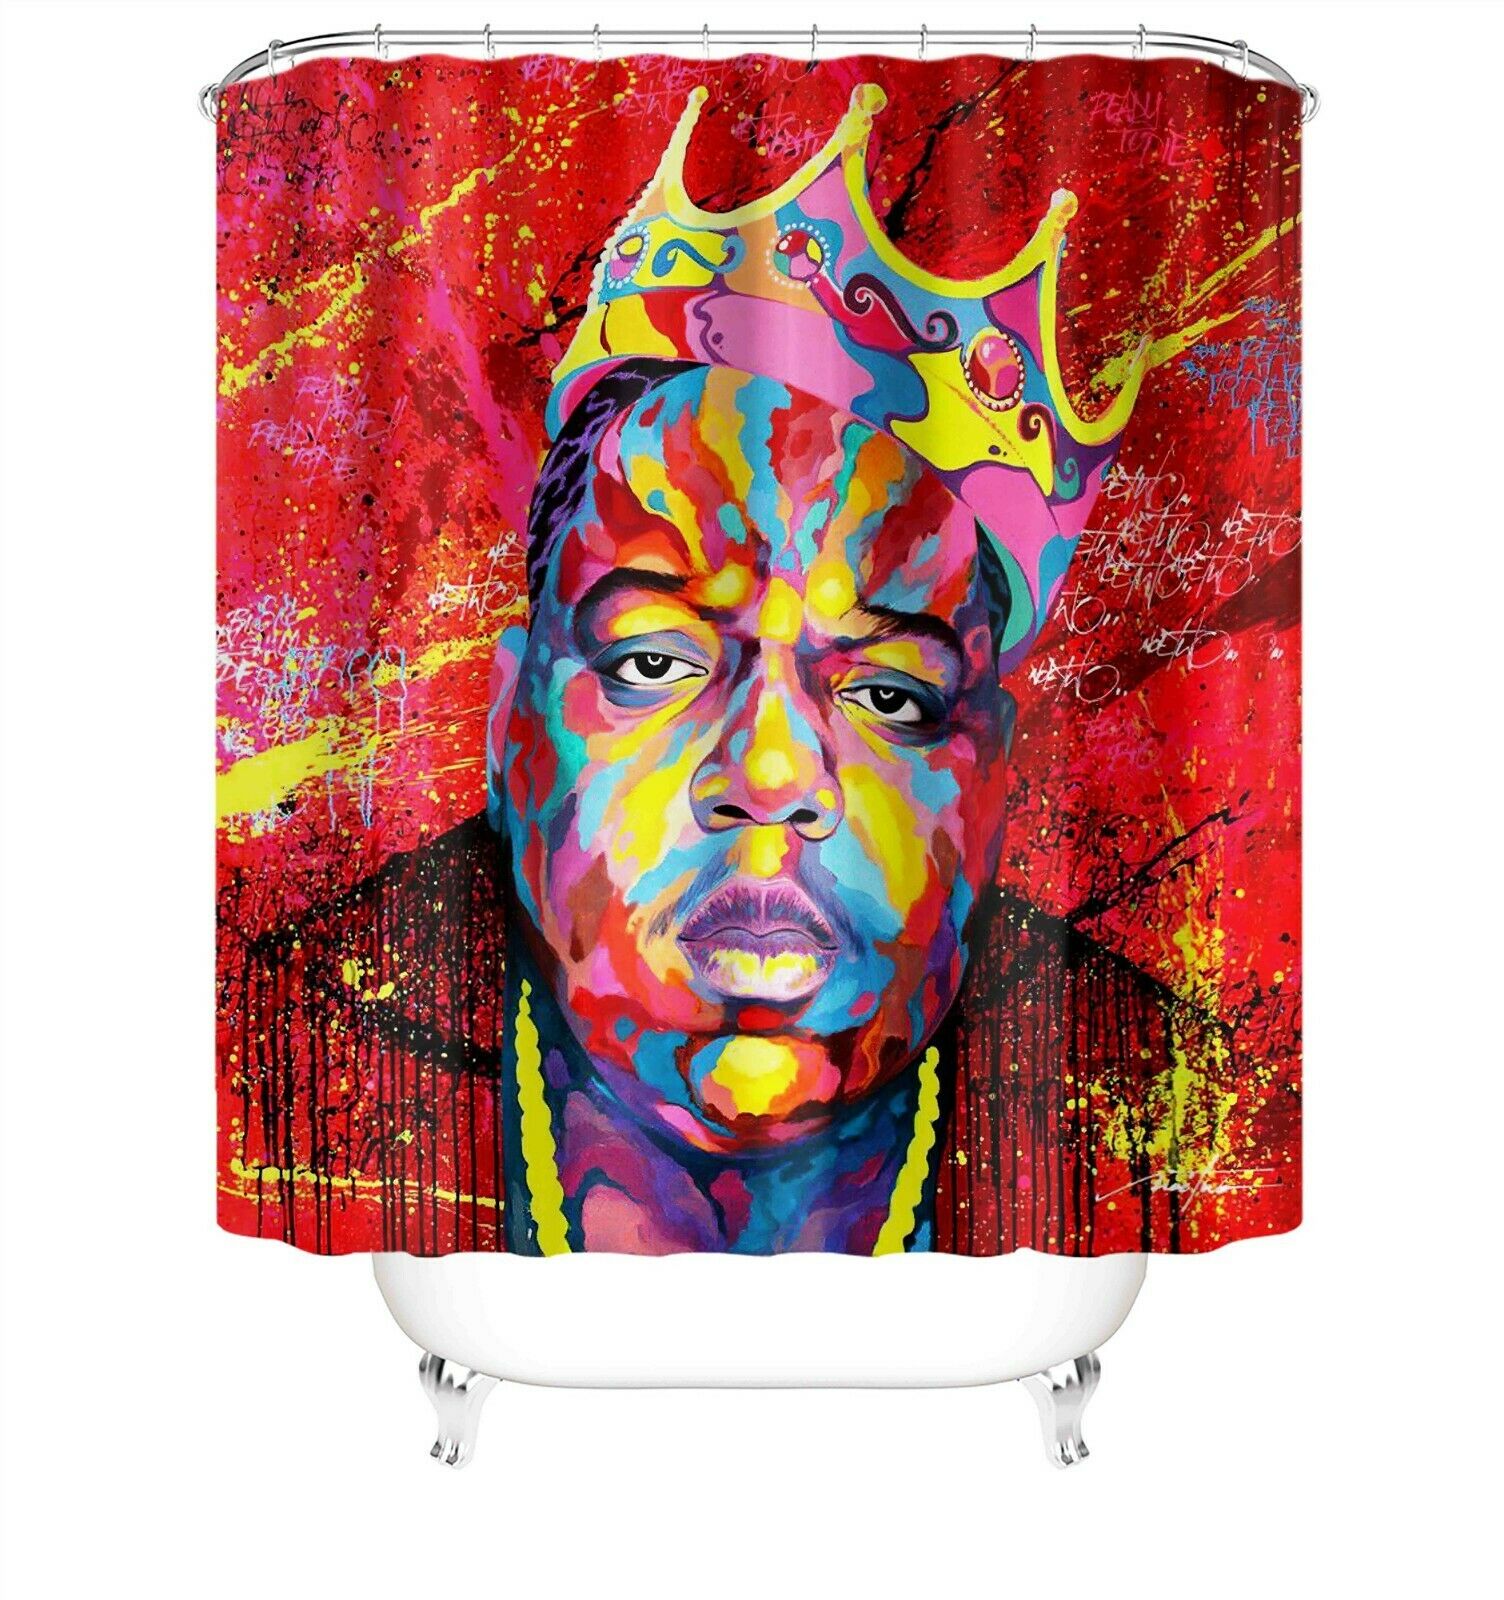 Color Man Fabric Shower Curtain For Bathroom-STYLEGOING